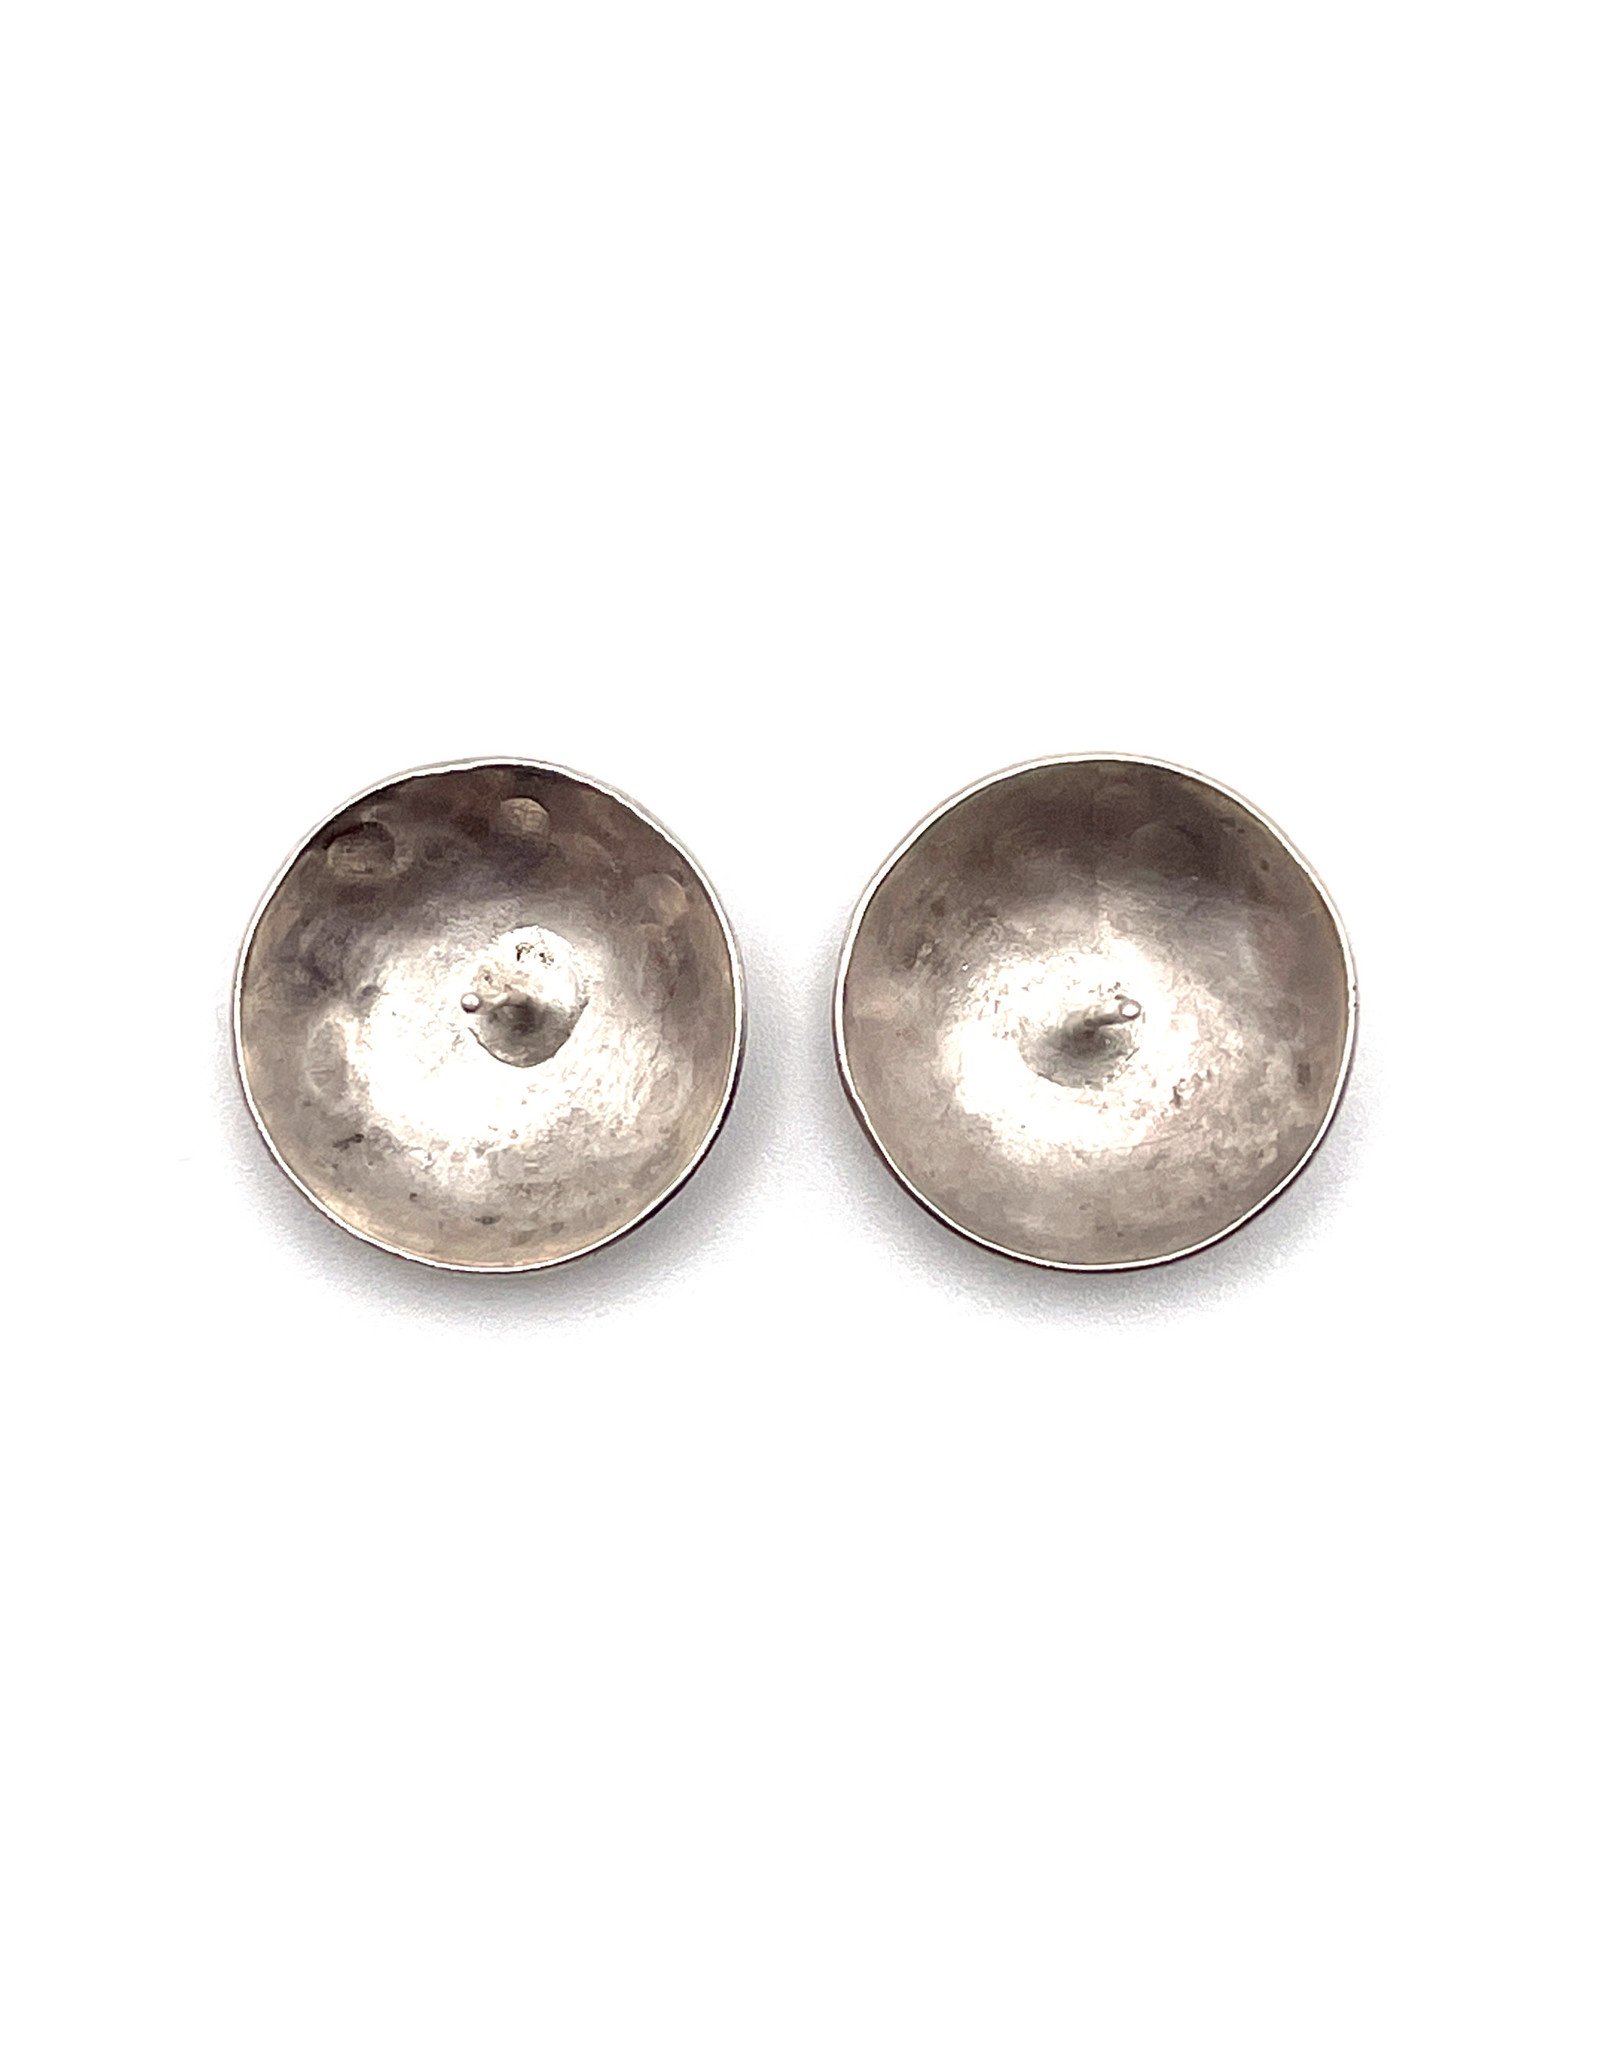 Circular Silver Earrings with Rough Western-Style Design